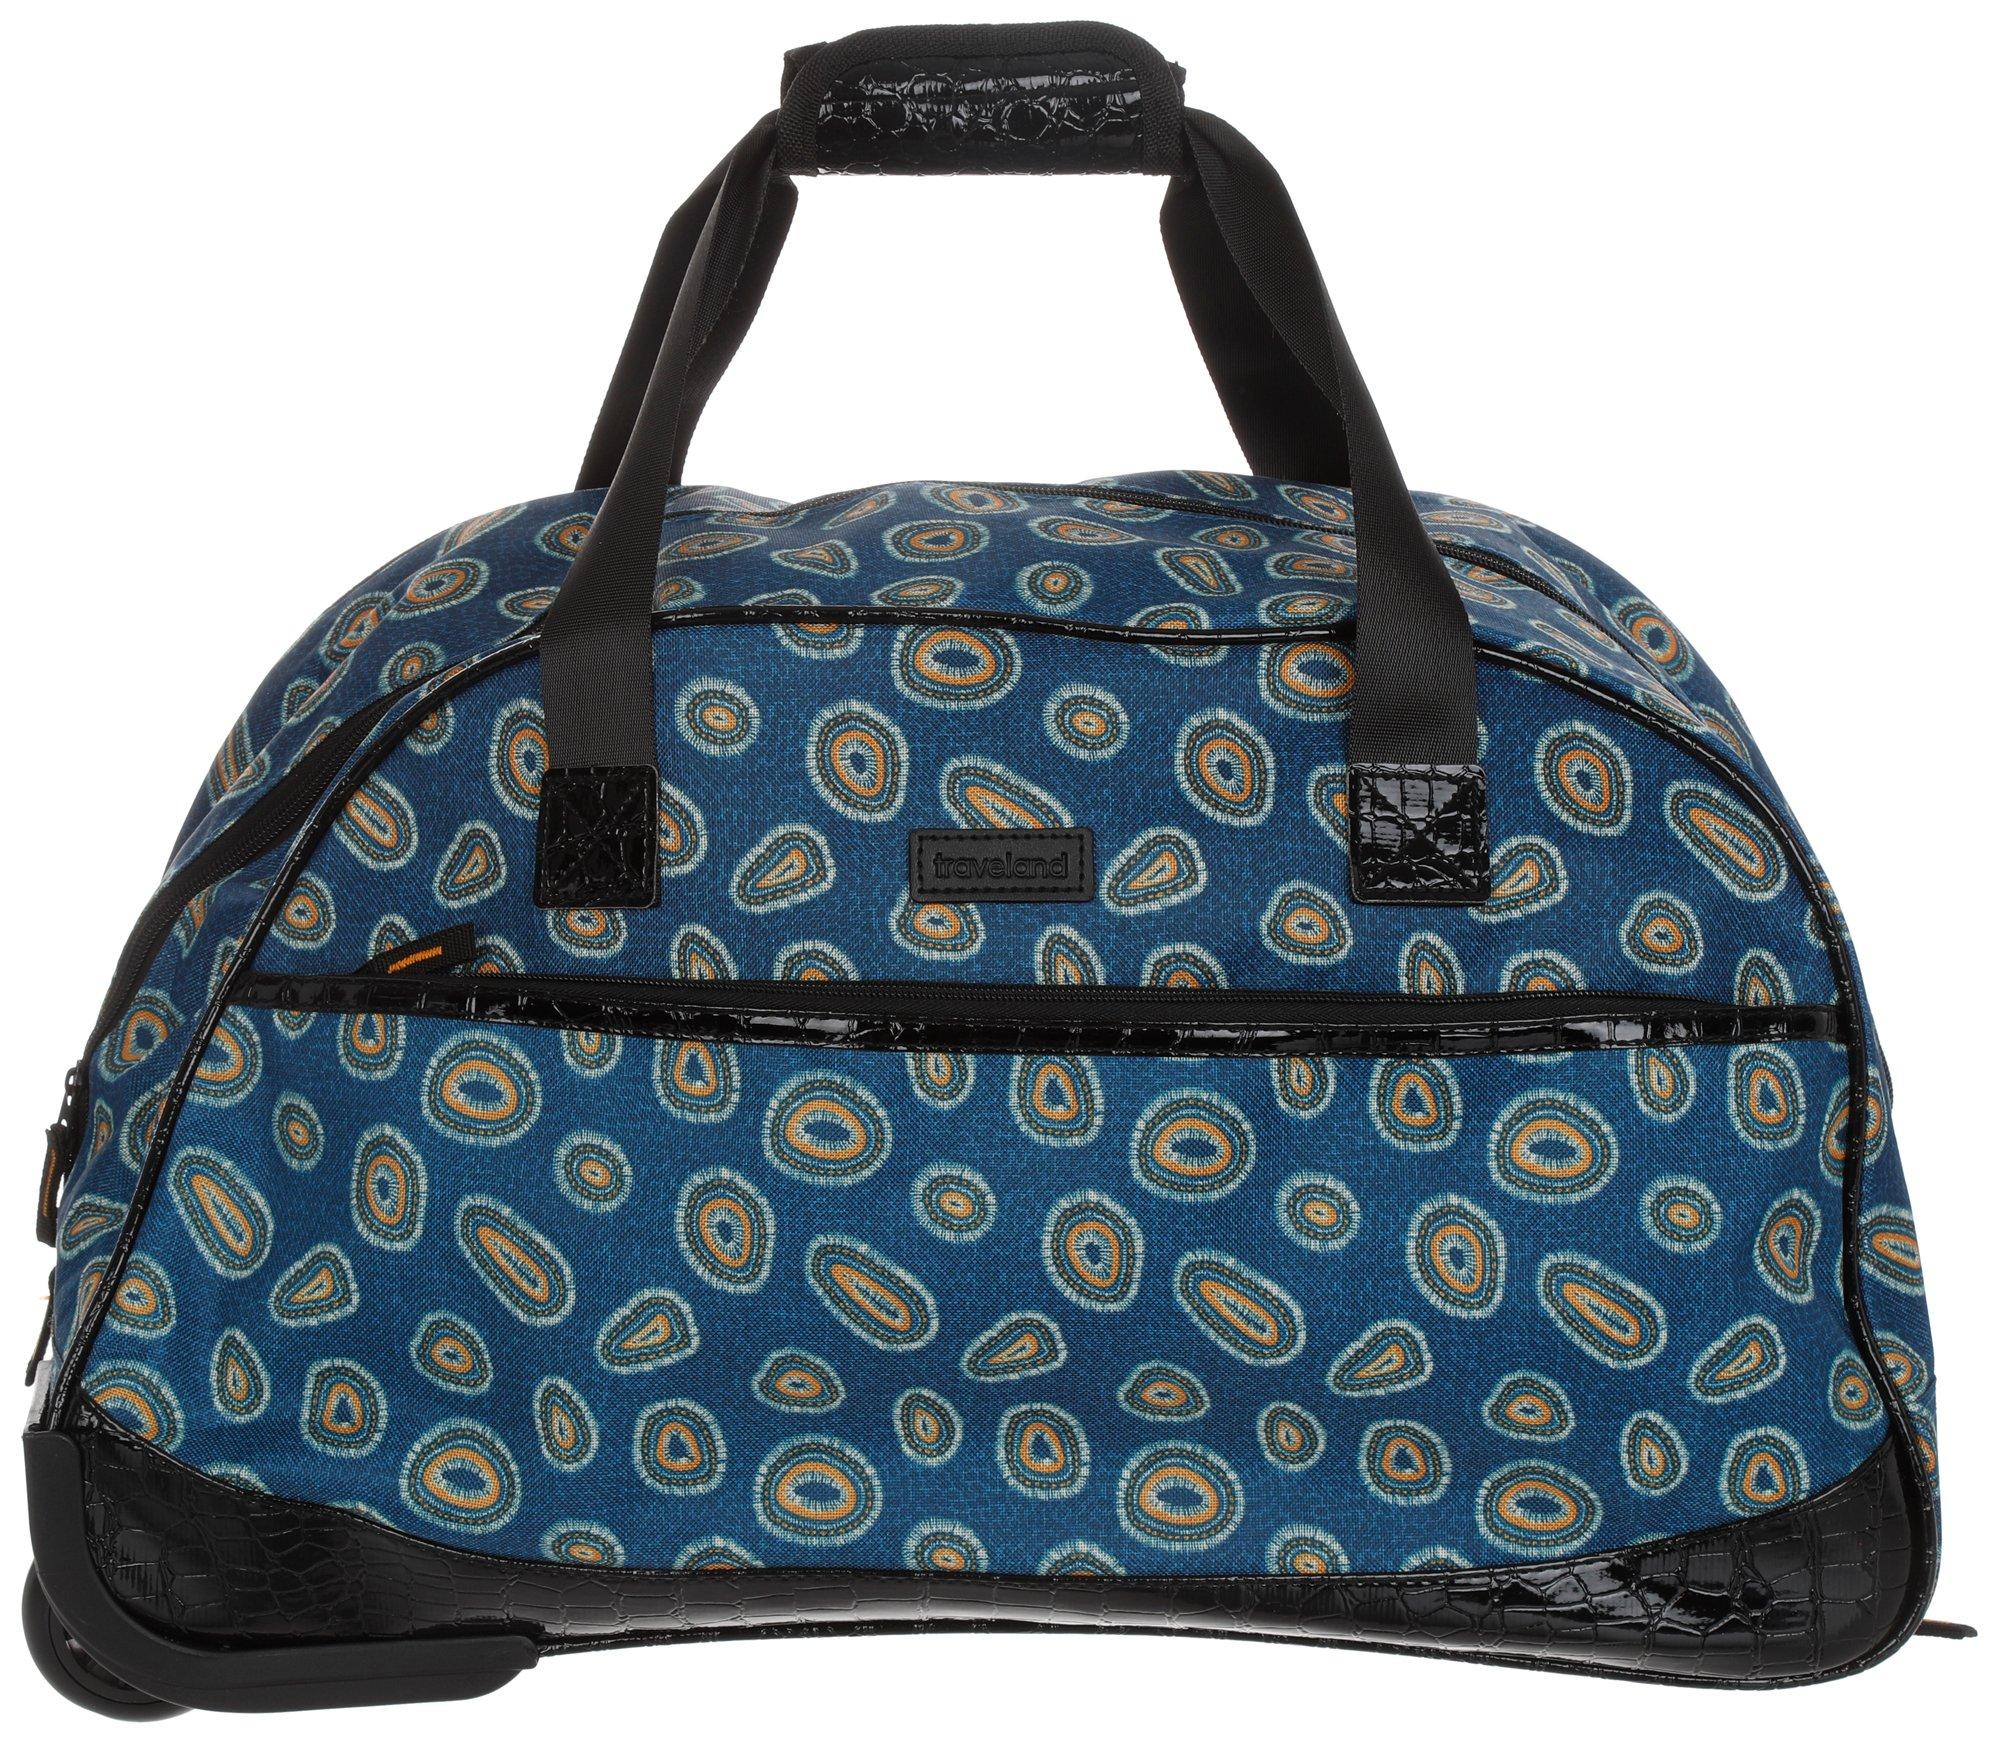 Abstract Print Carry-On Duffle